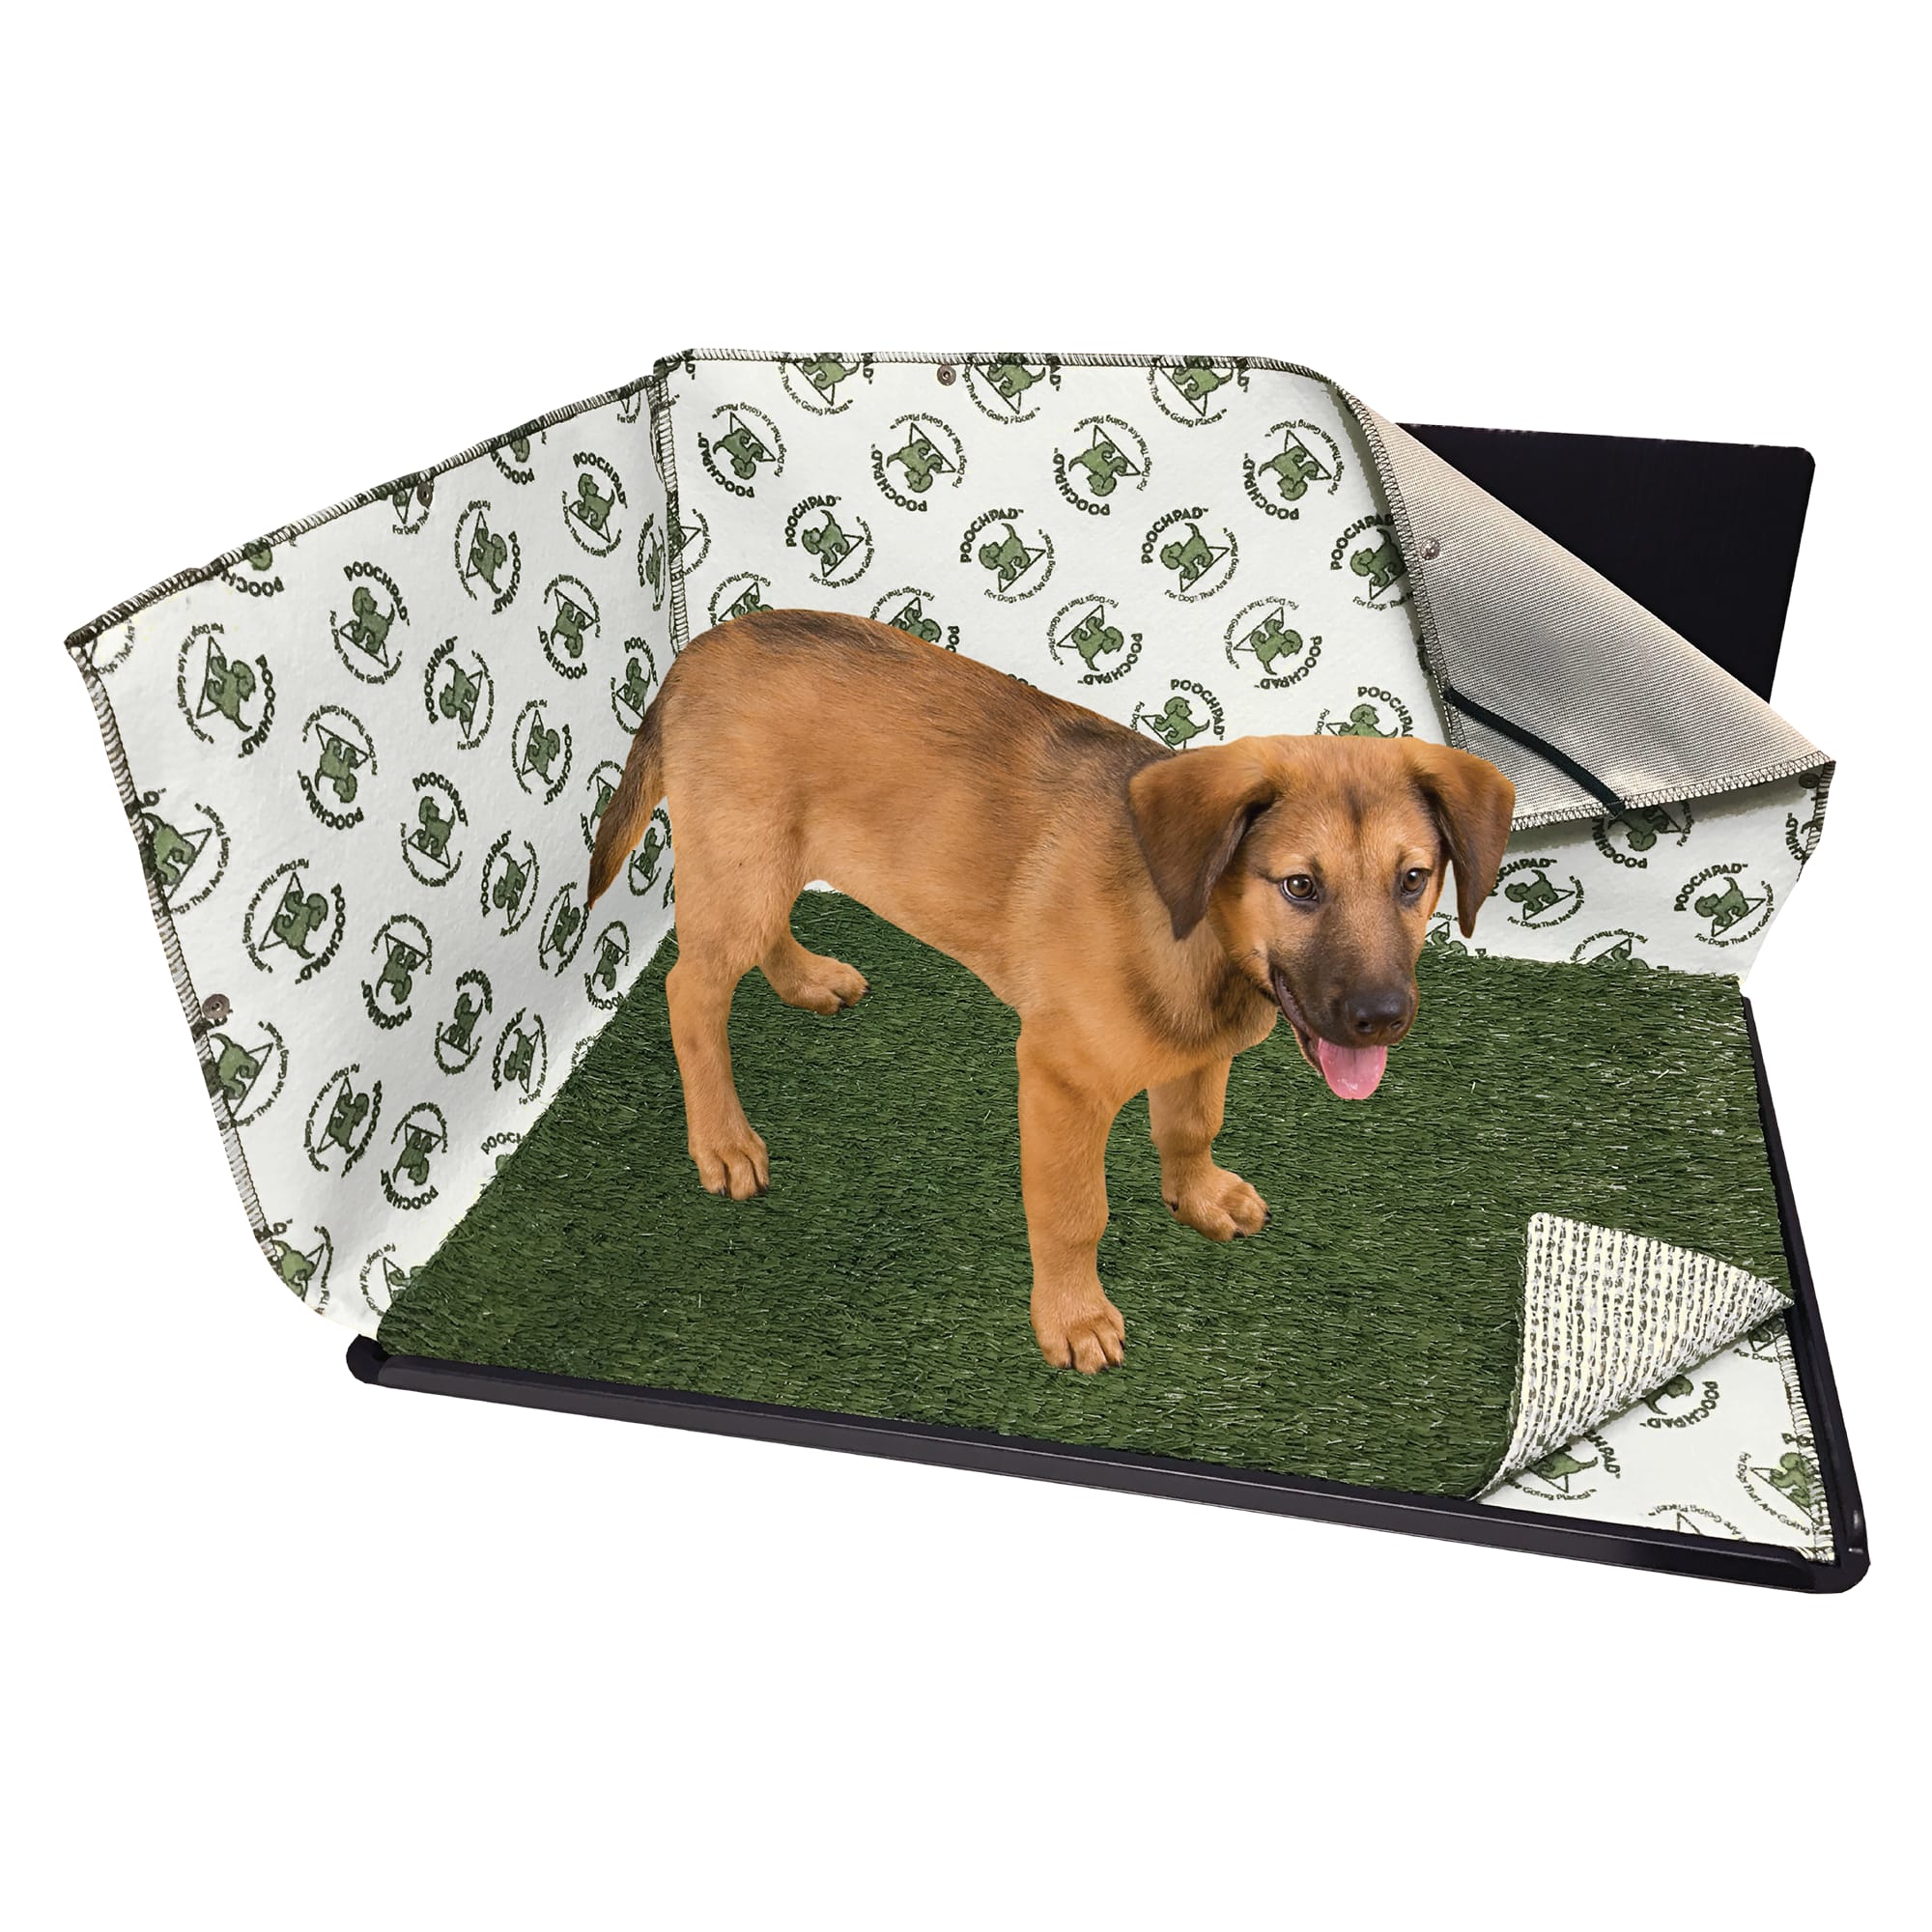 PoochPads Indoor Dog Potty Pro